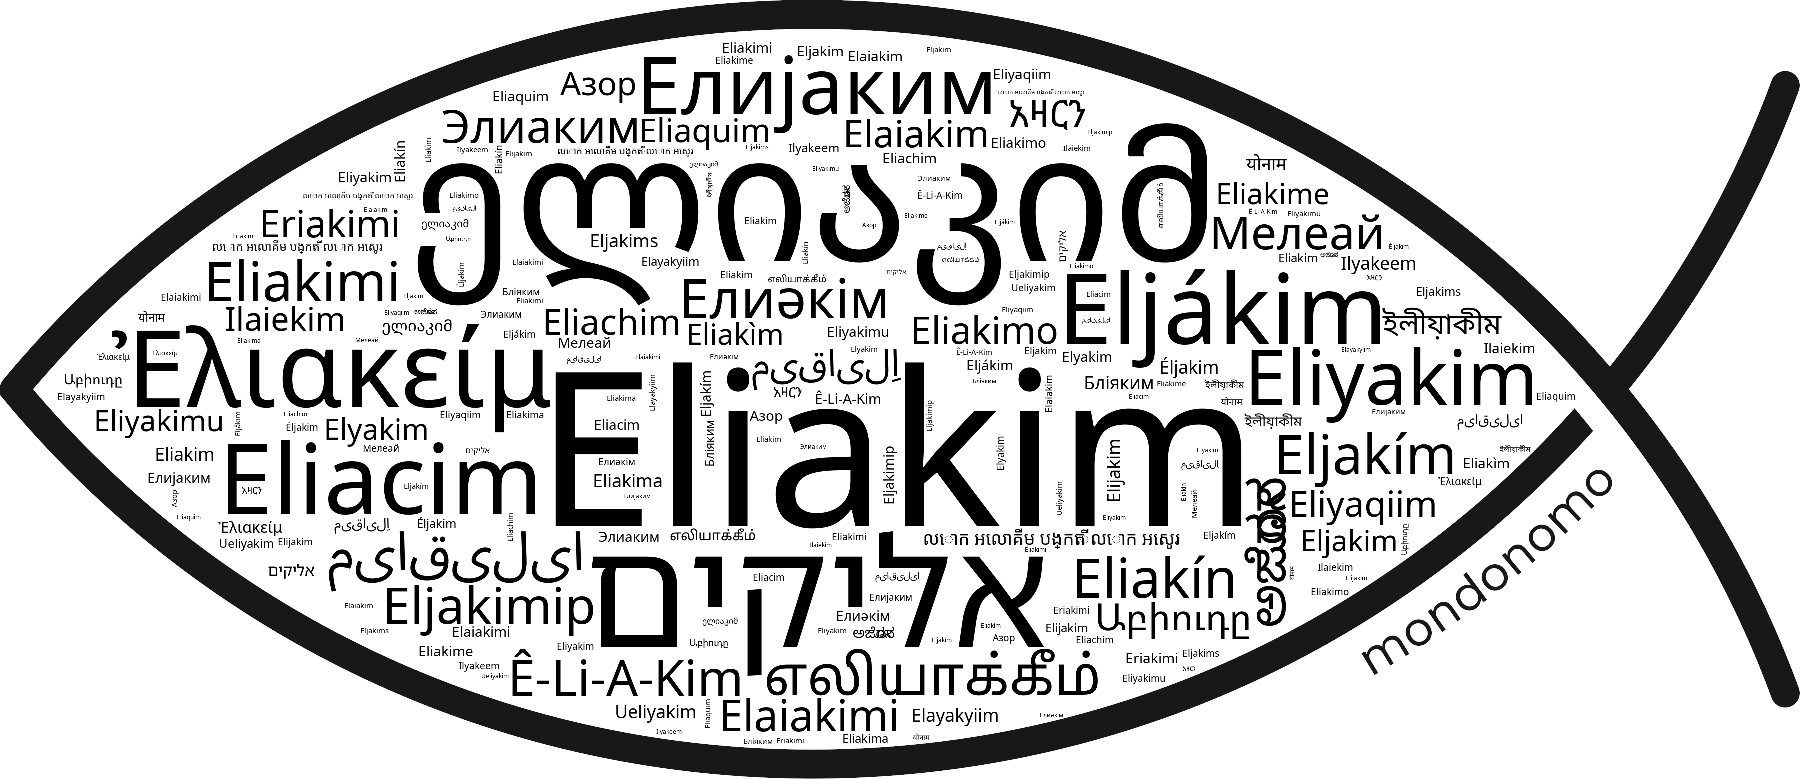 Name Eliakim in the world's Bibles